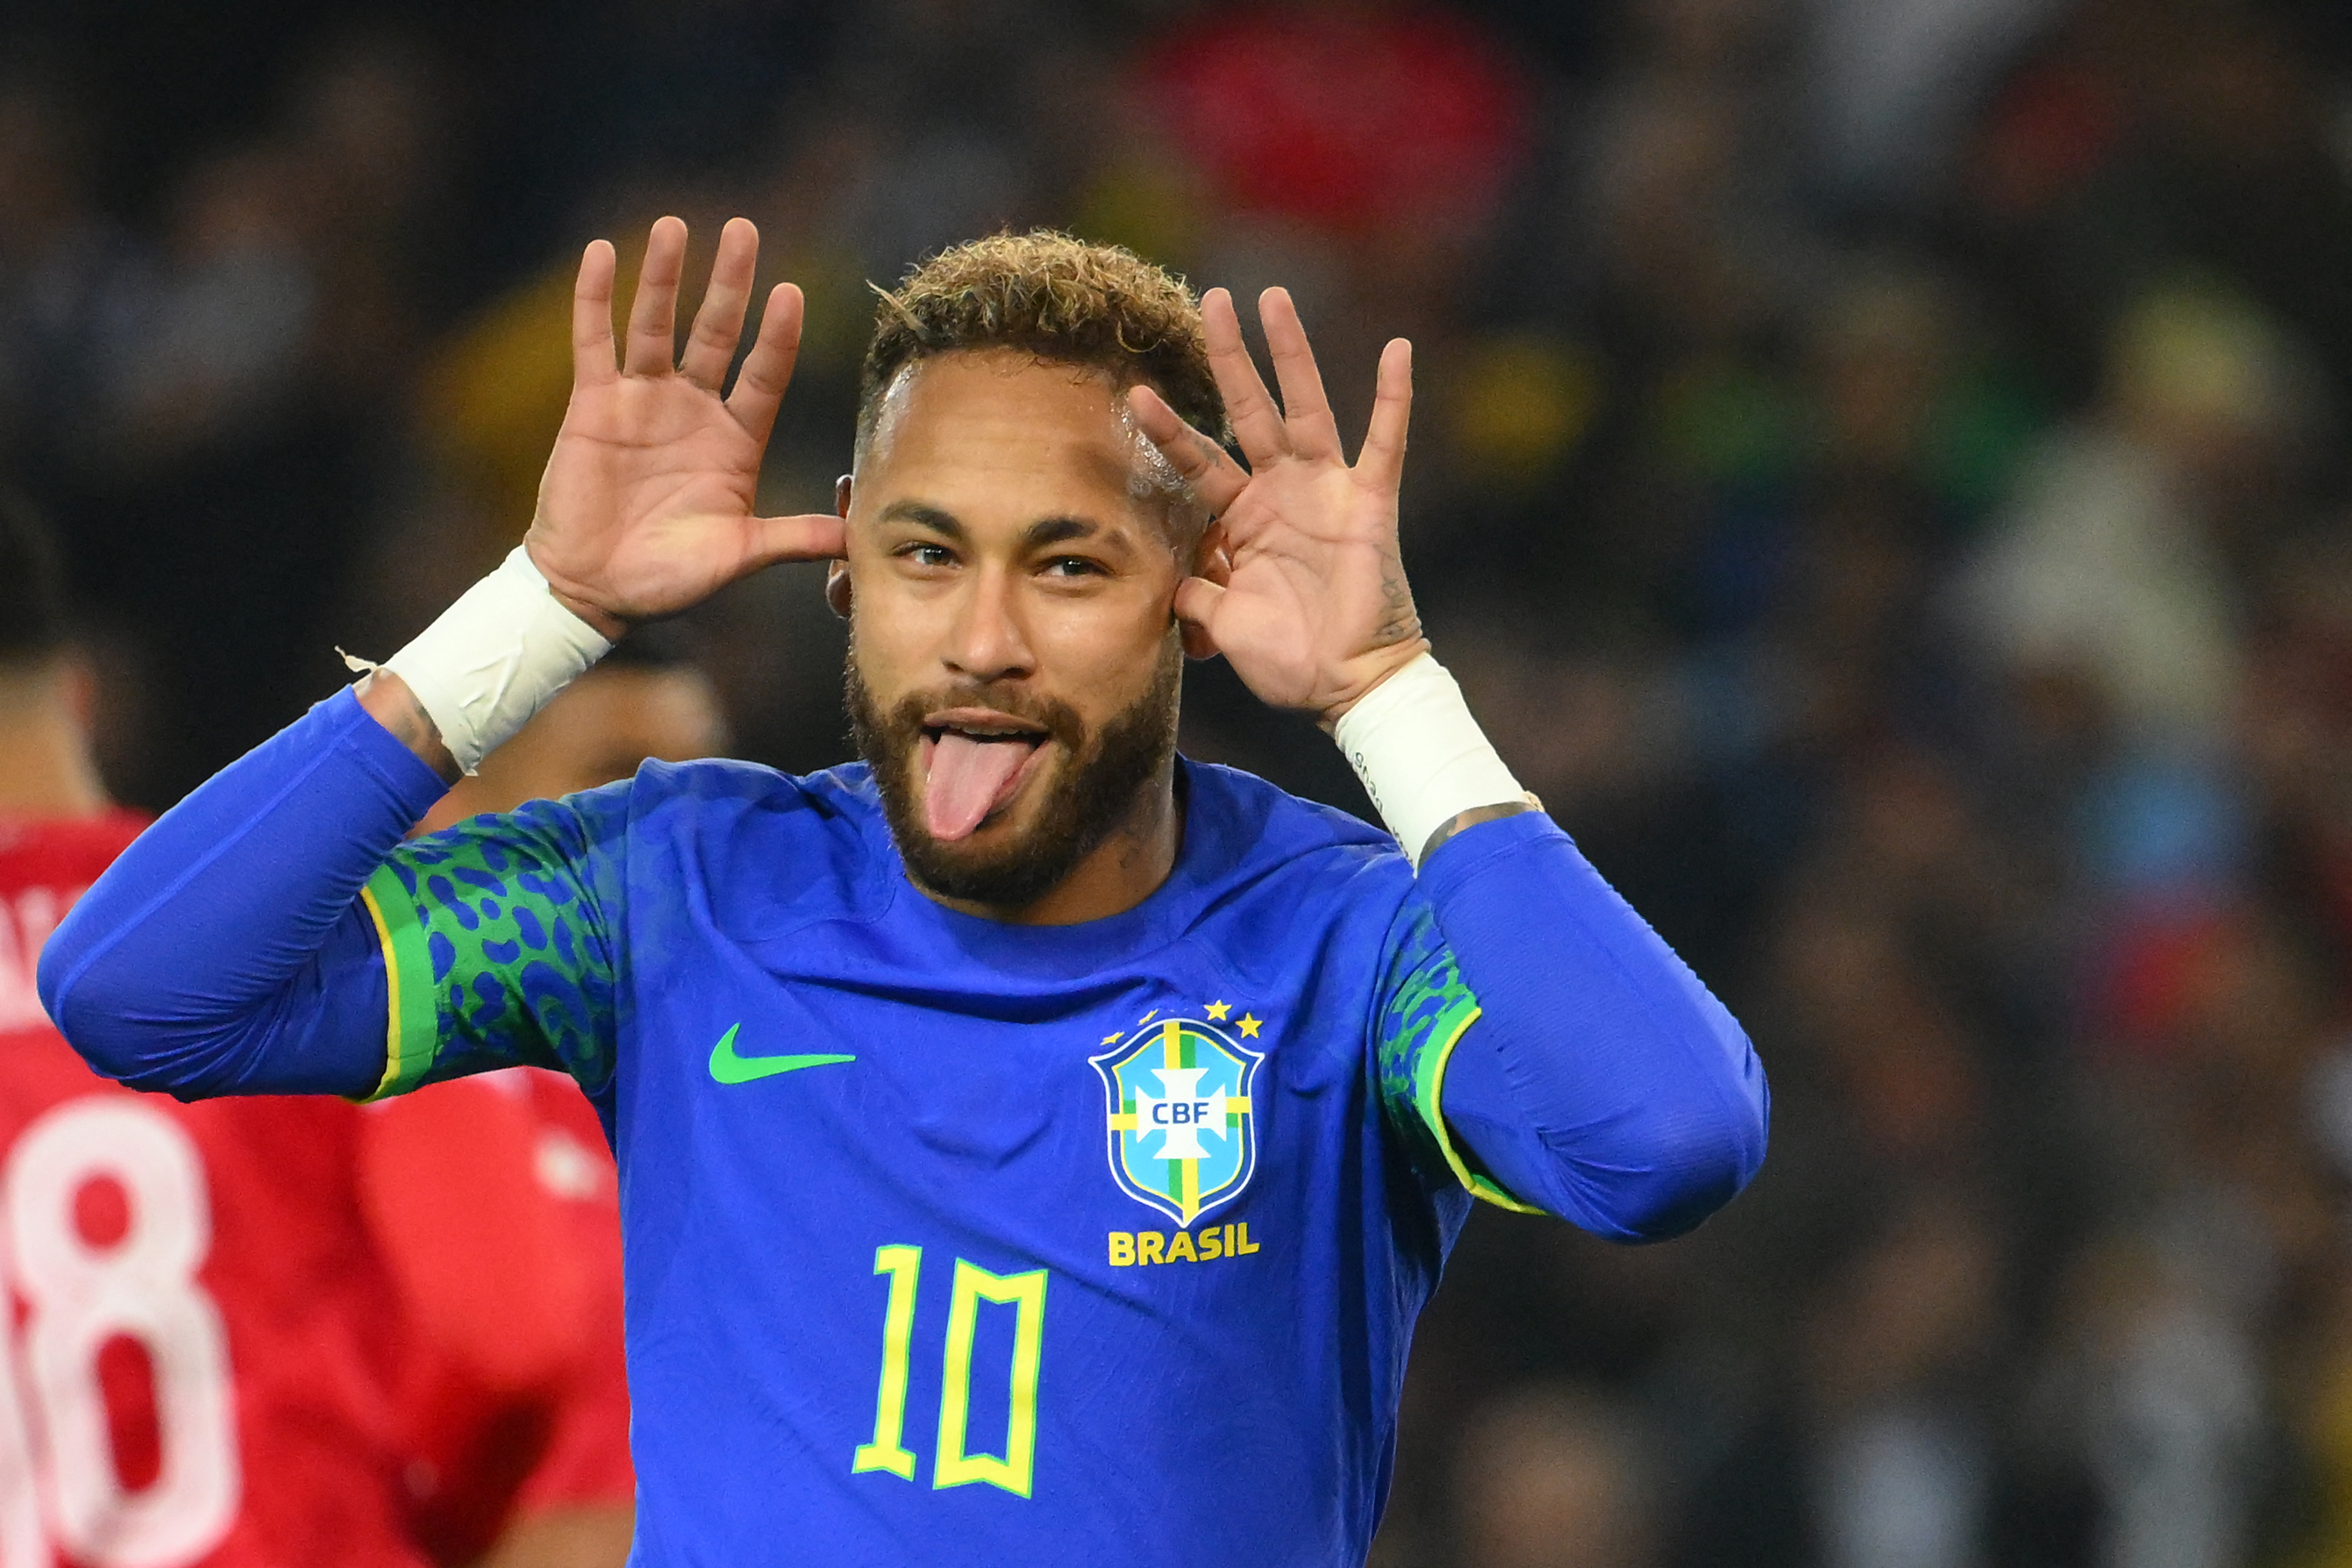 Neymar aiming for glory and redemption with Brazil in Qatar